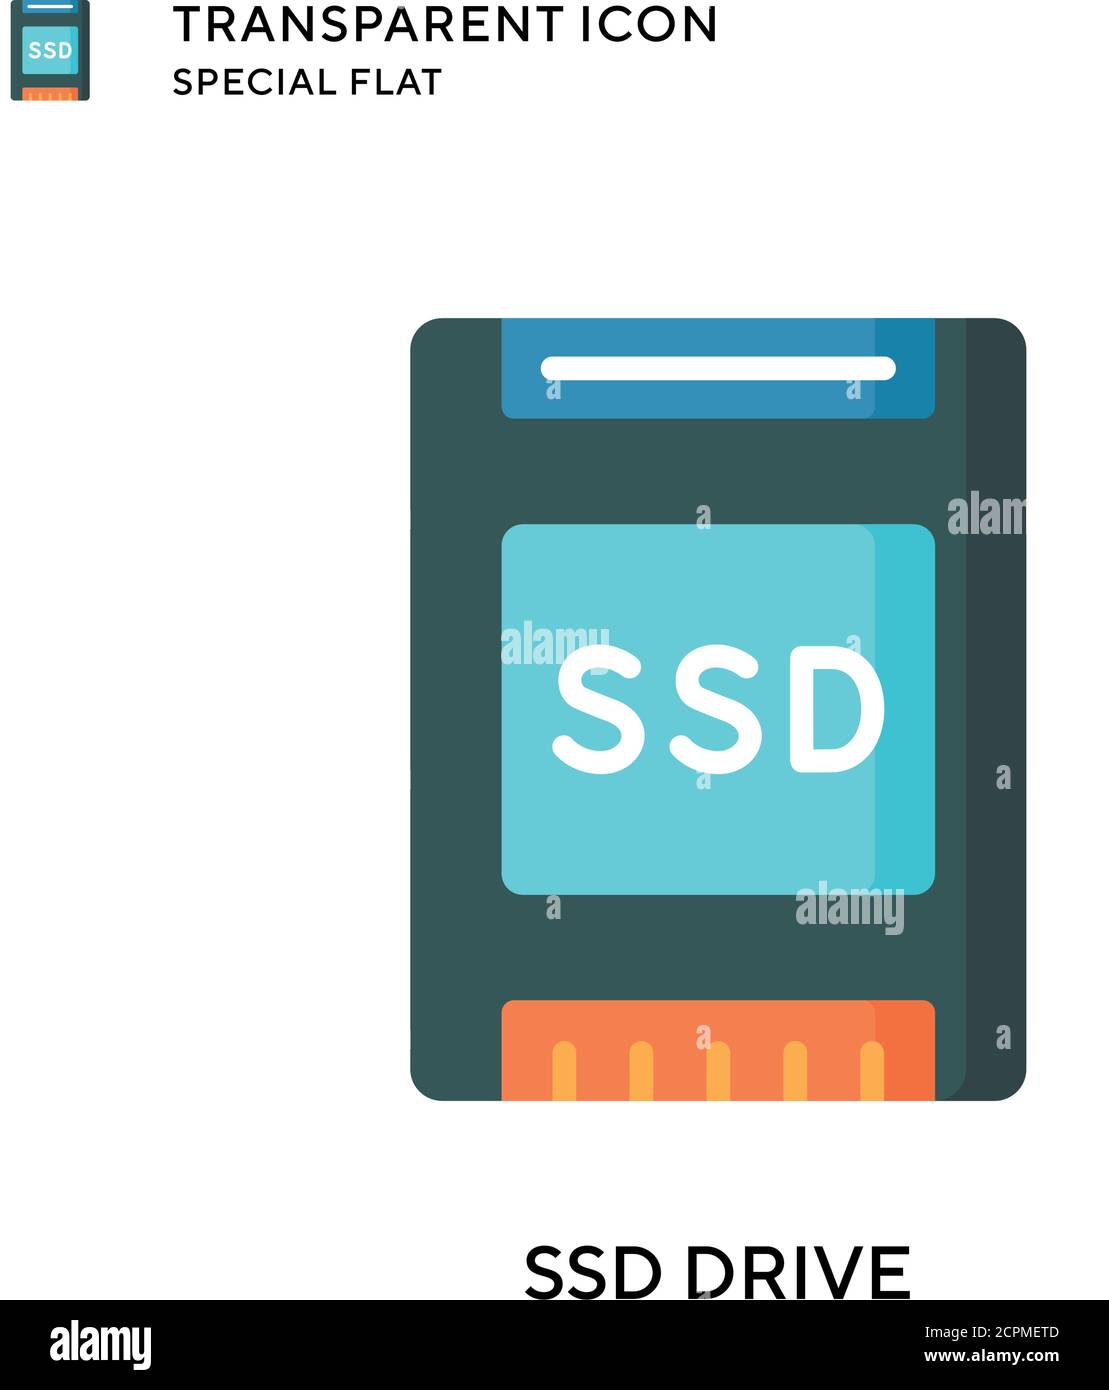 Ssd drive vector icon. Flat style illustration. EPS 10 vector. Stock Vector